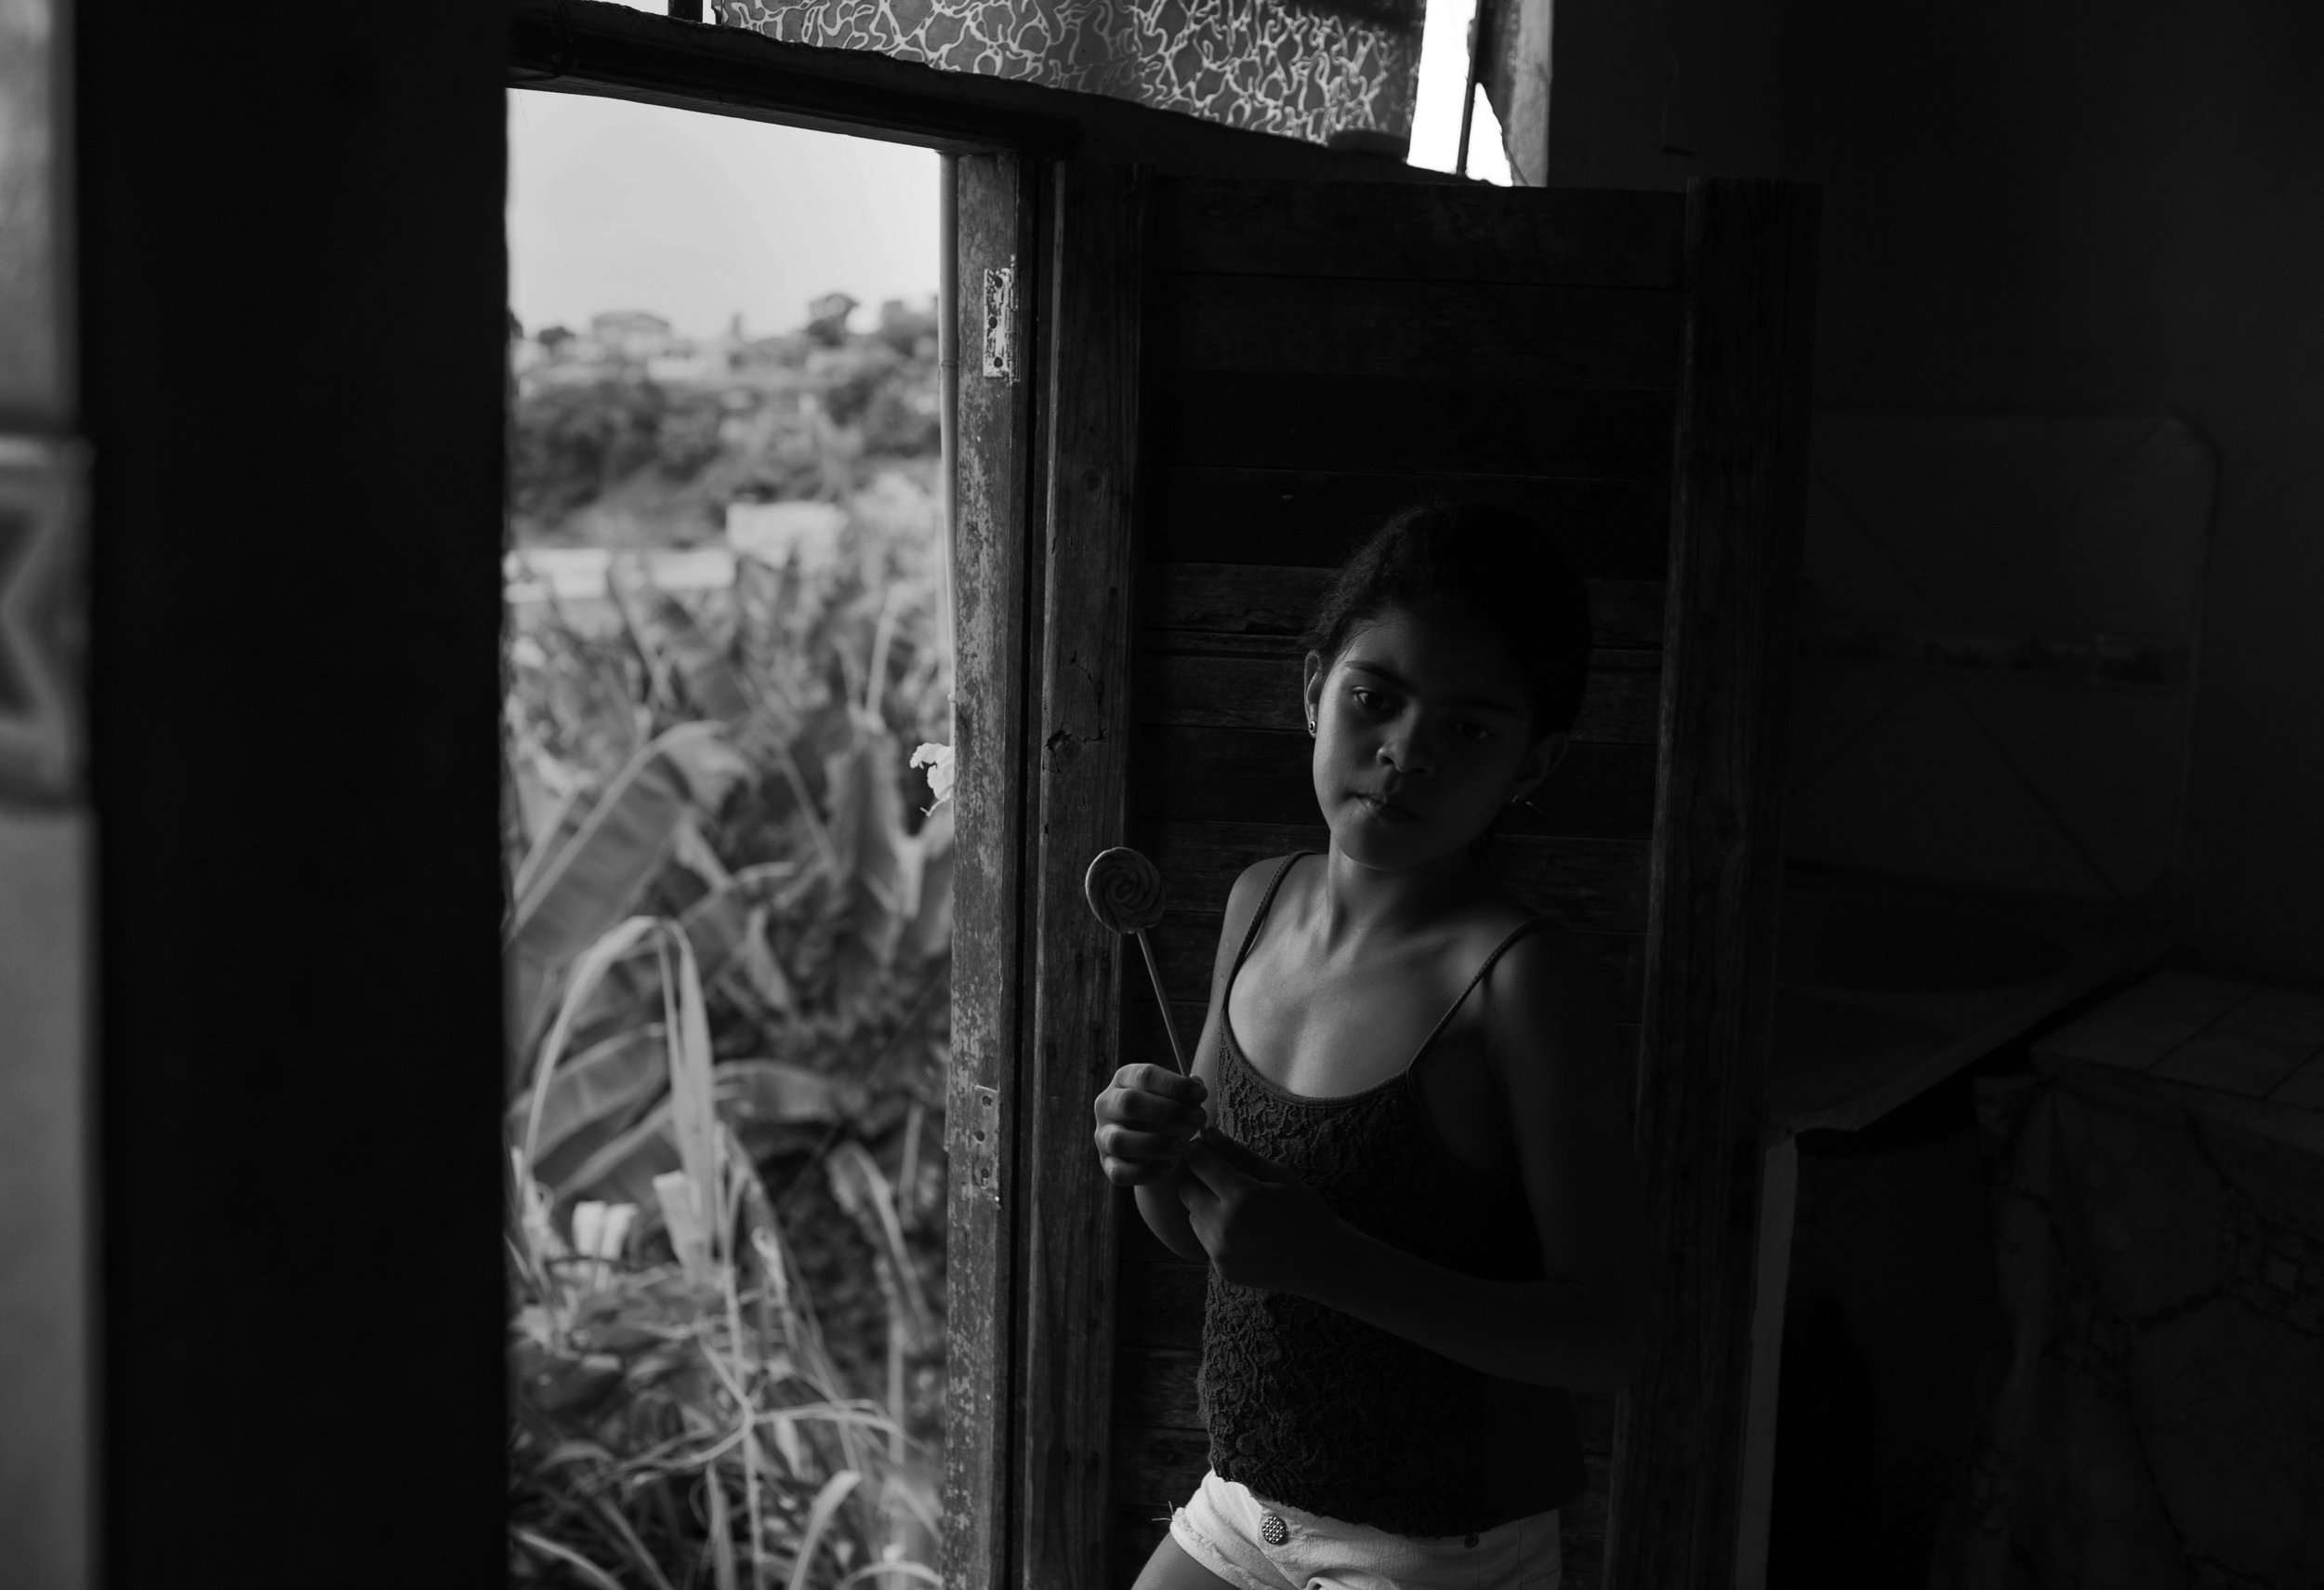  Temperatures soar during the summer in northeast Brazil, and many homes cannot afford air conditioning. Here, Evellyn Mendes Santos, age 9, stands near a door that stays open in attempt to keep the family's home somewhat cool. But without screens on